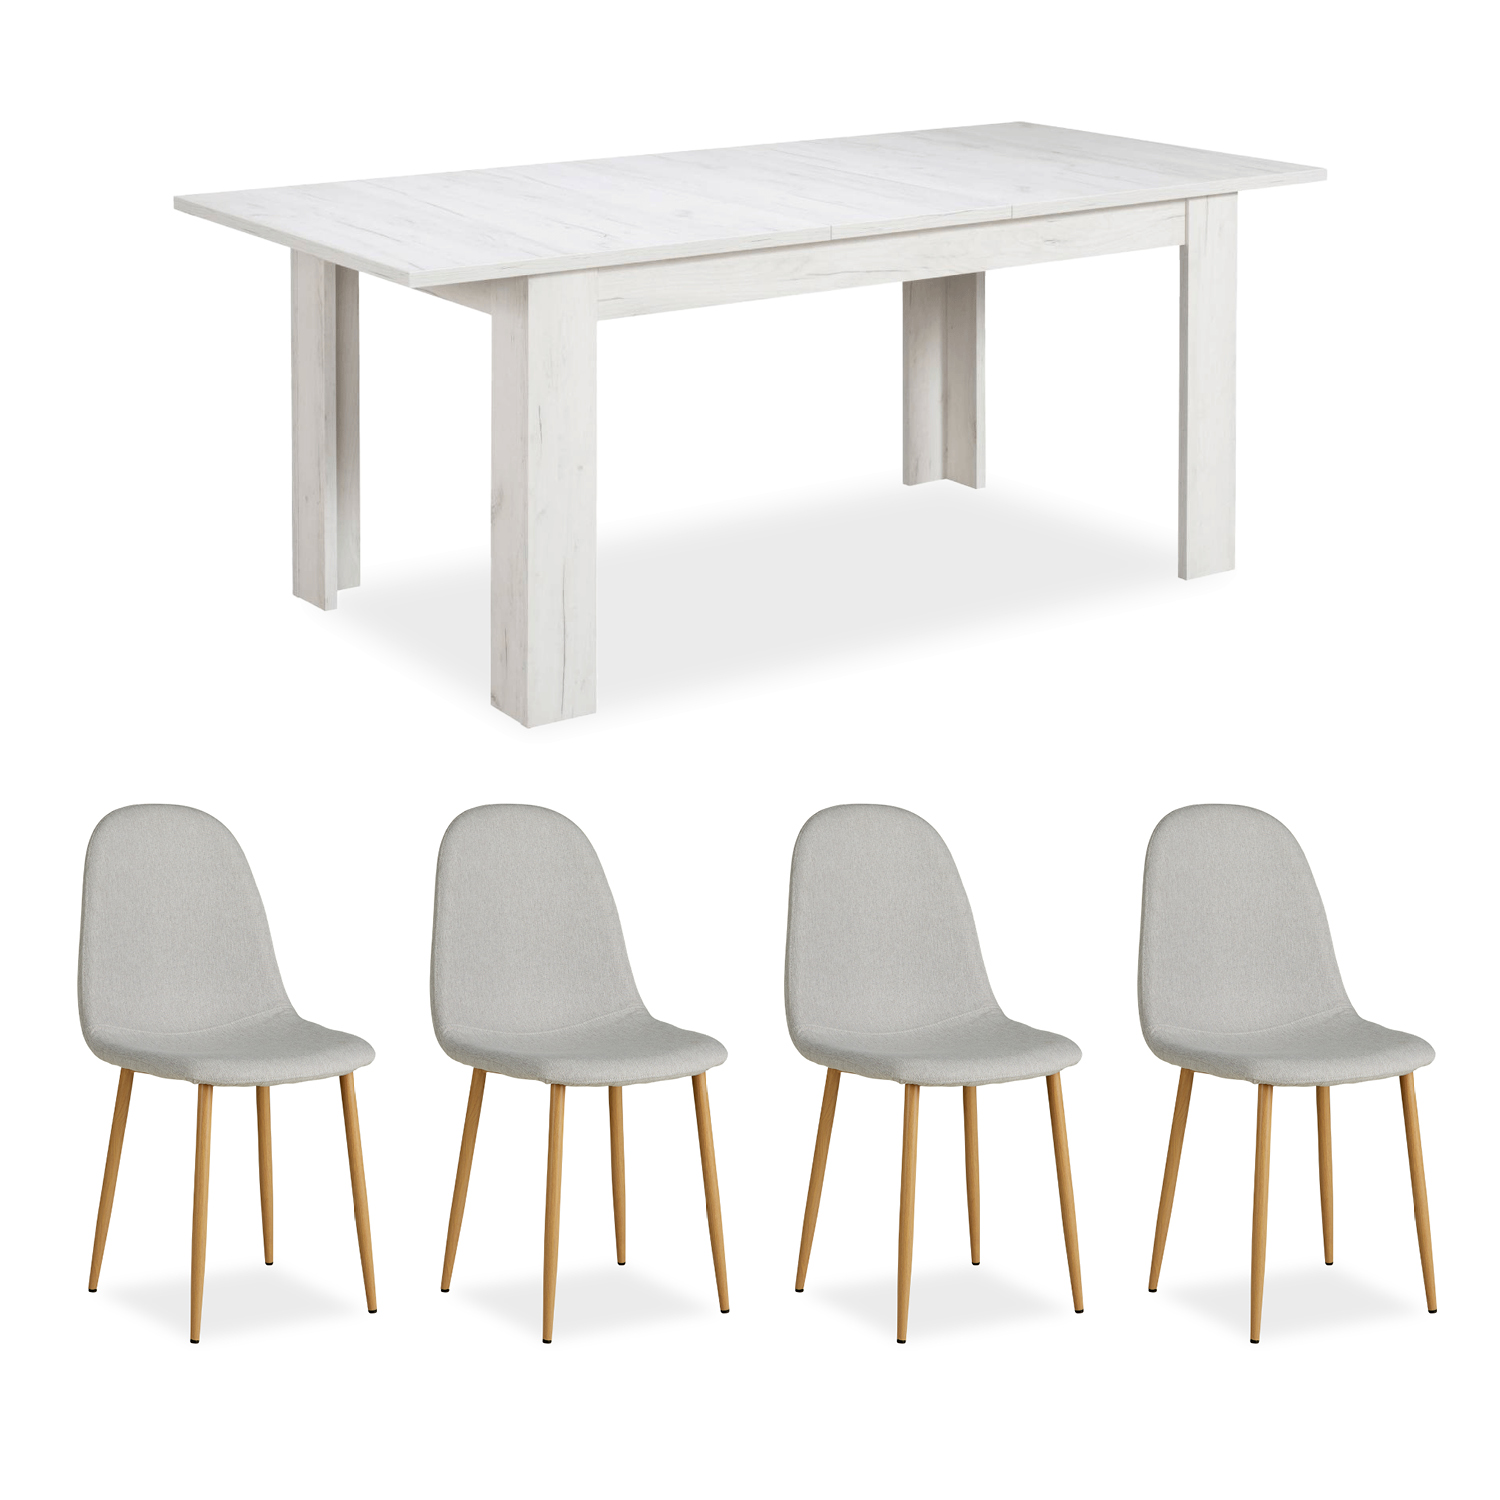 Dining Table 160x90 cm Extendable with 4 Chairs Grey Dining Room Table Wooden Table White